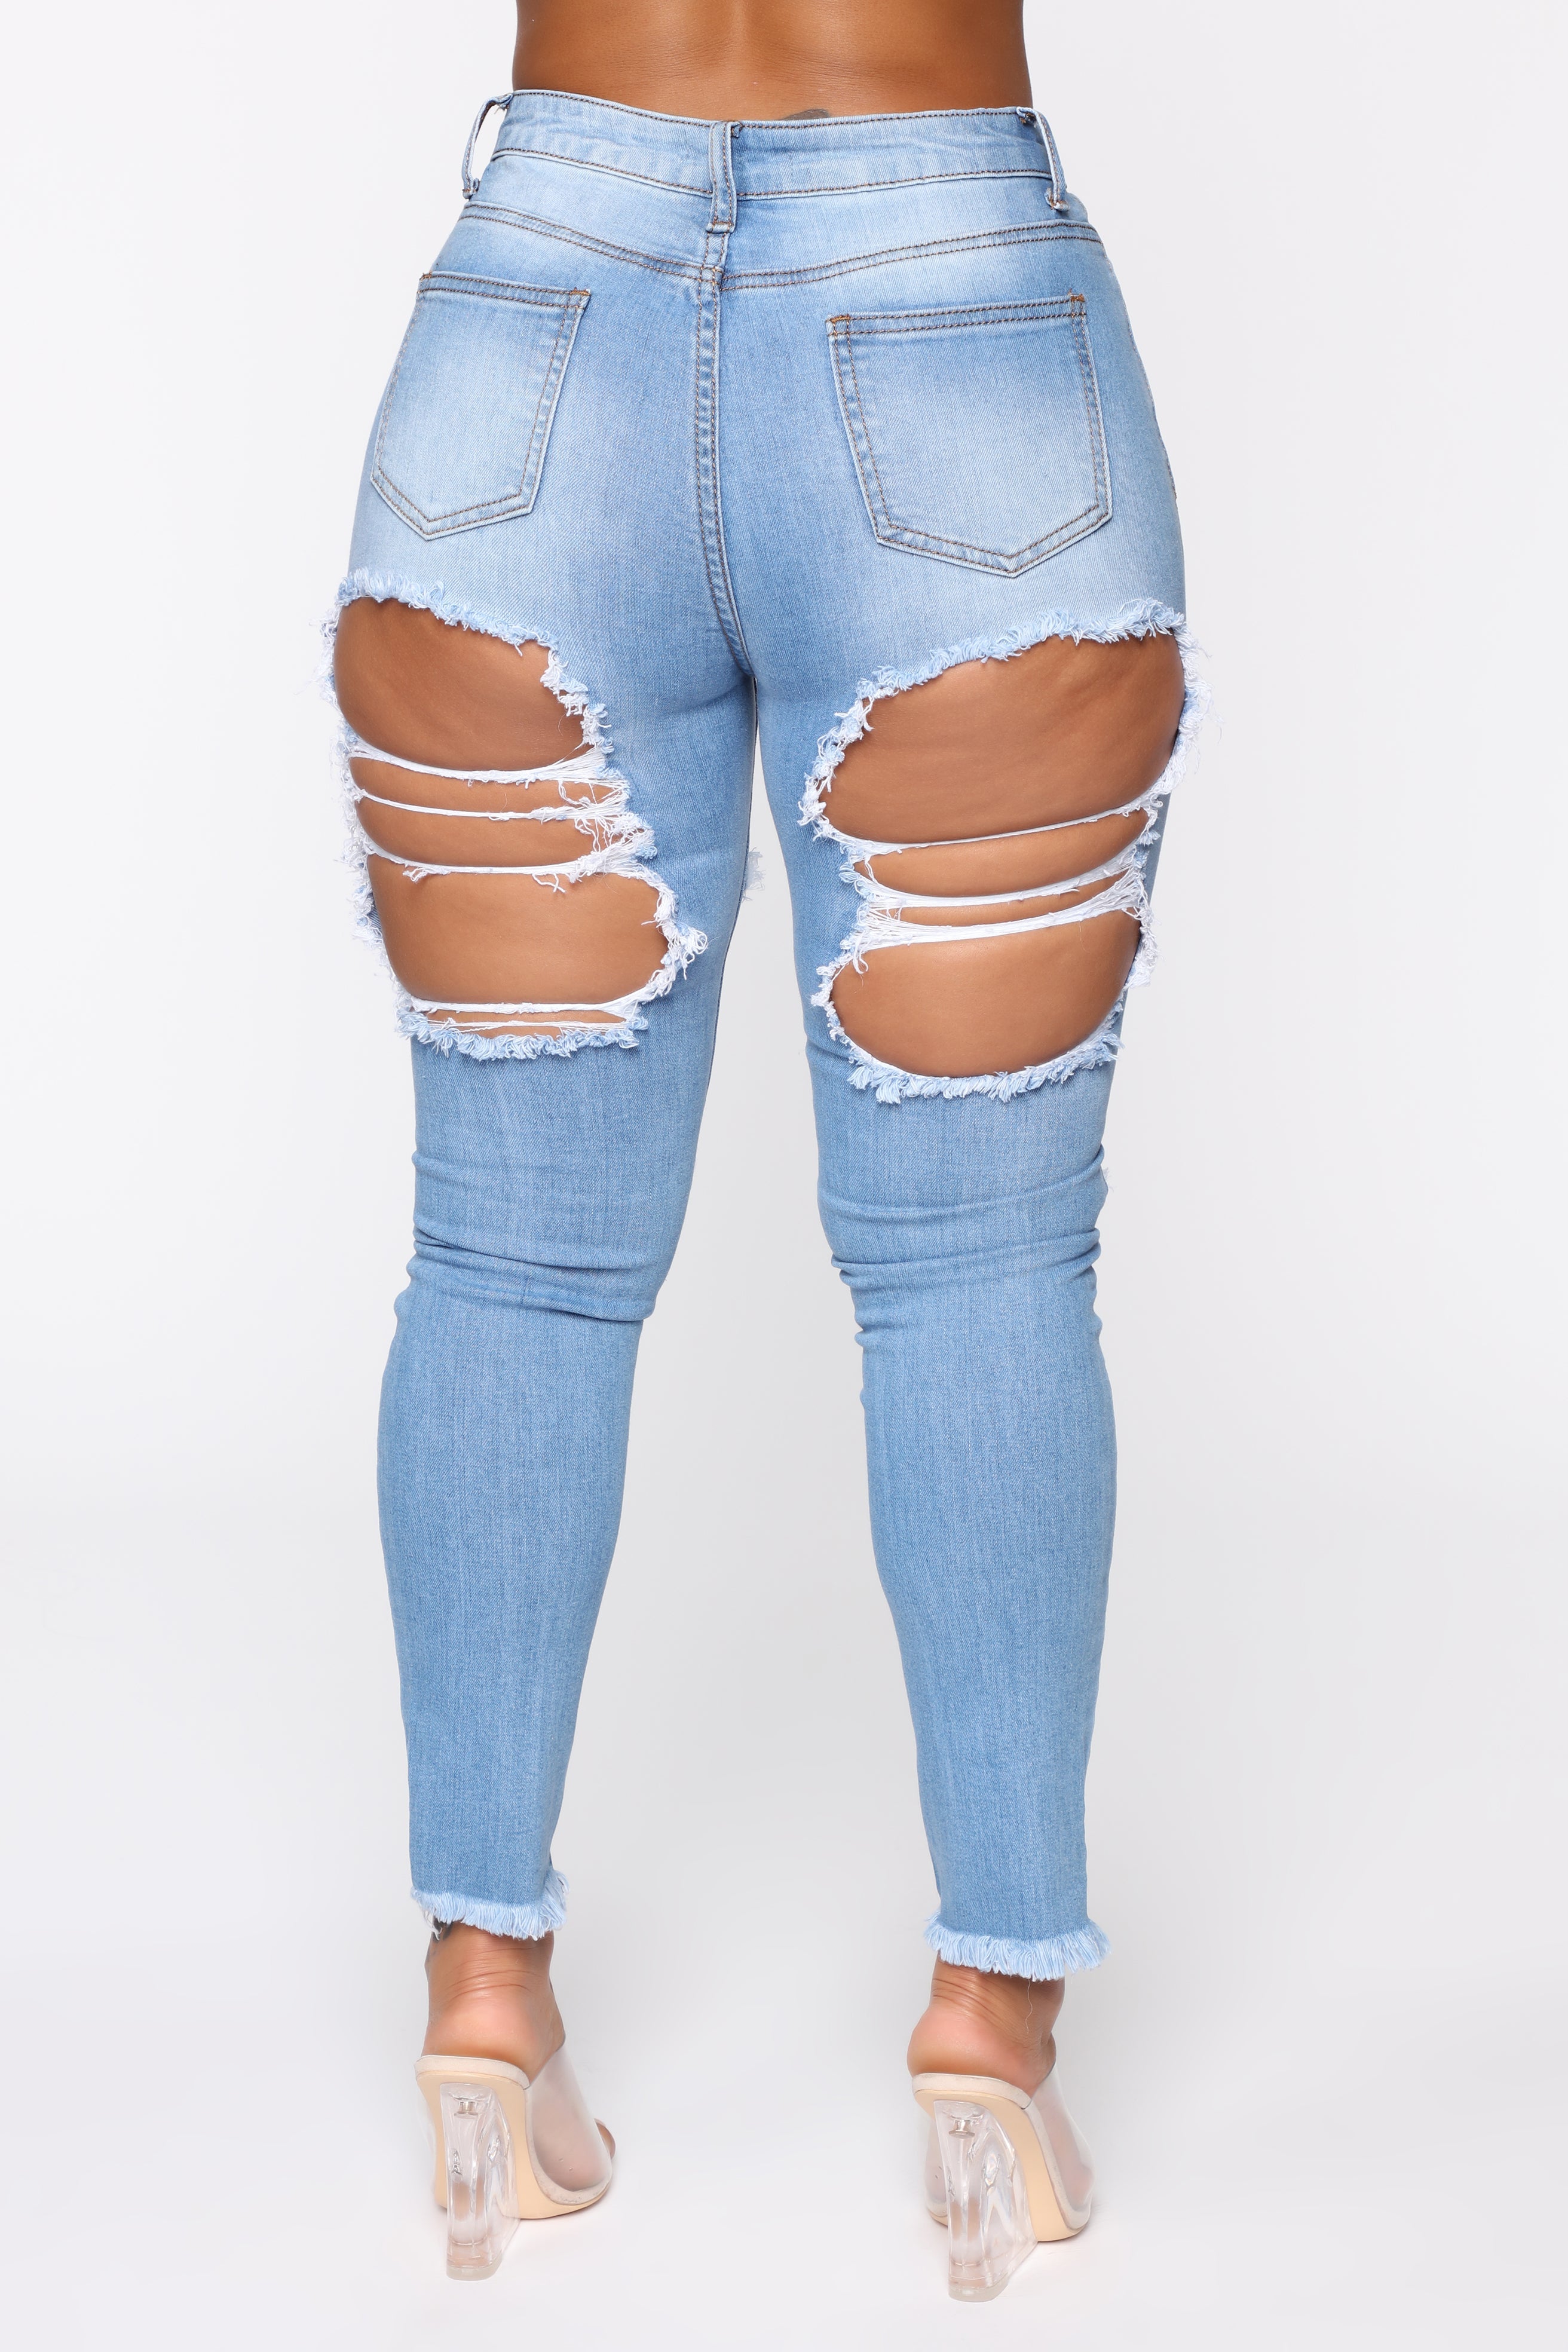 Talk Of The Town Distressed Skinny Jeans - Light Blue Wash Ins Street